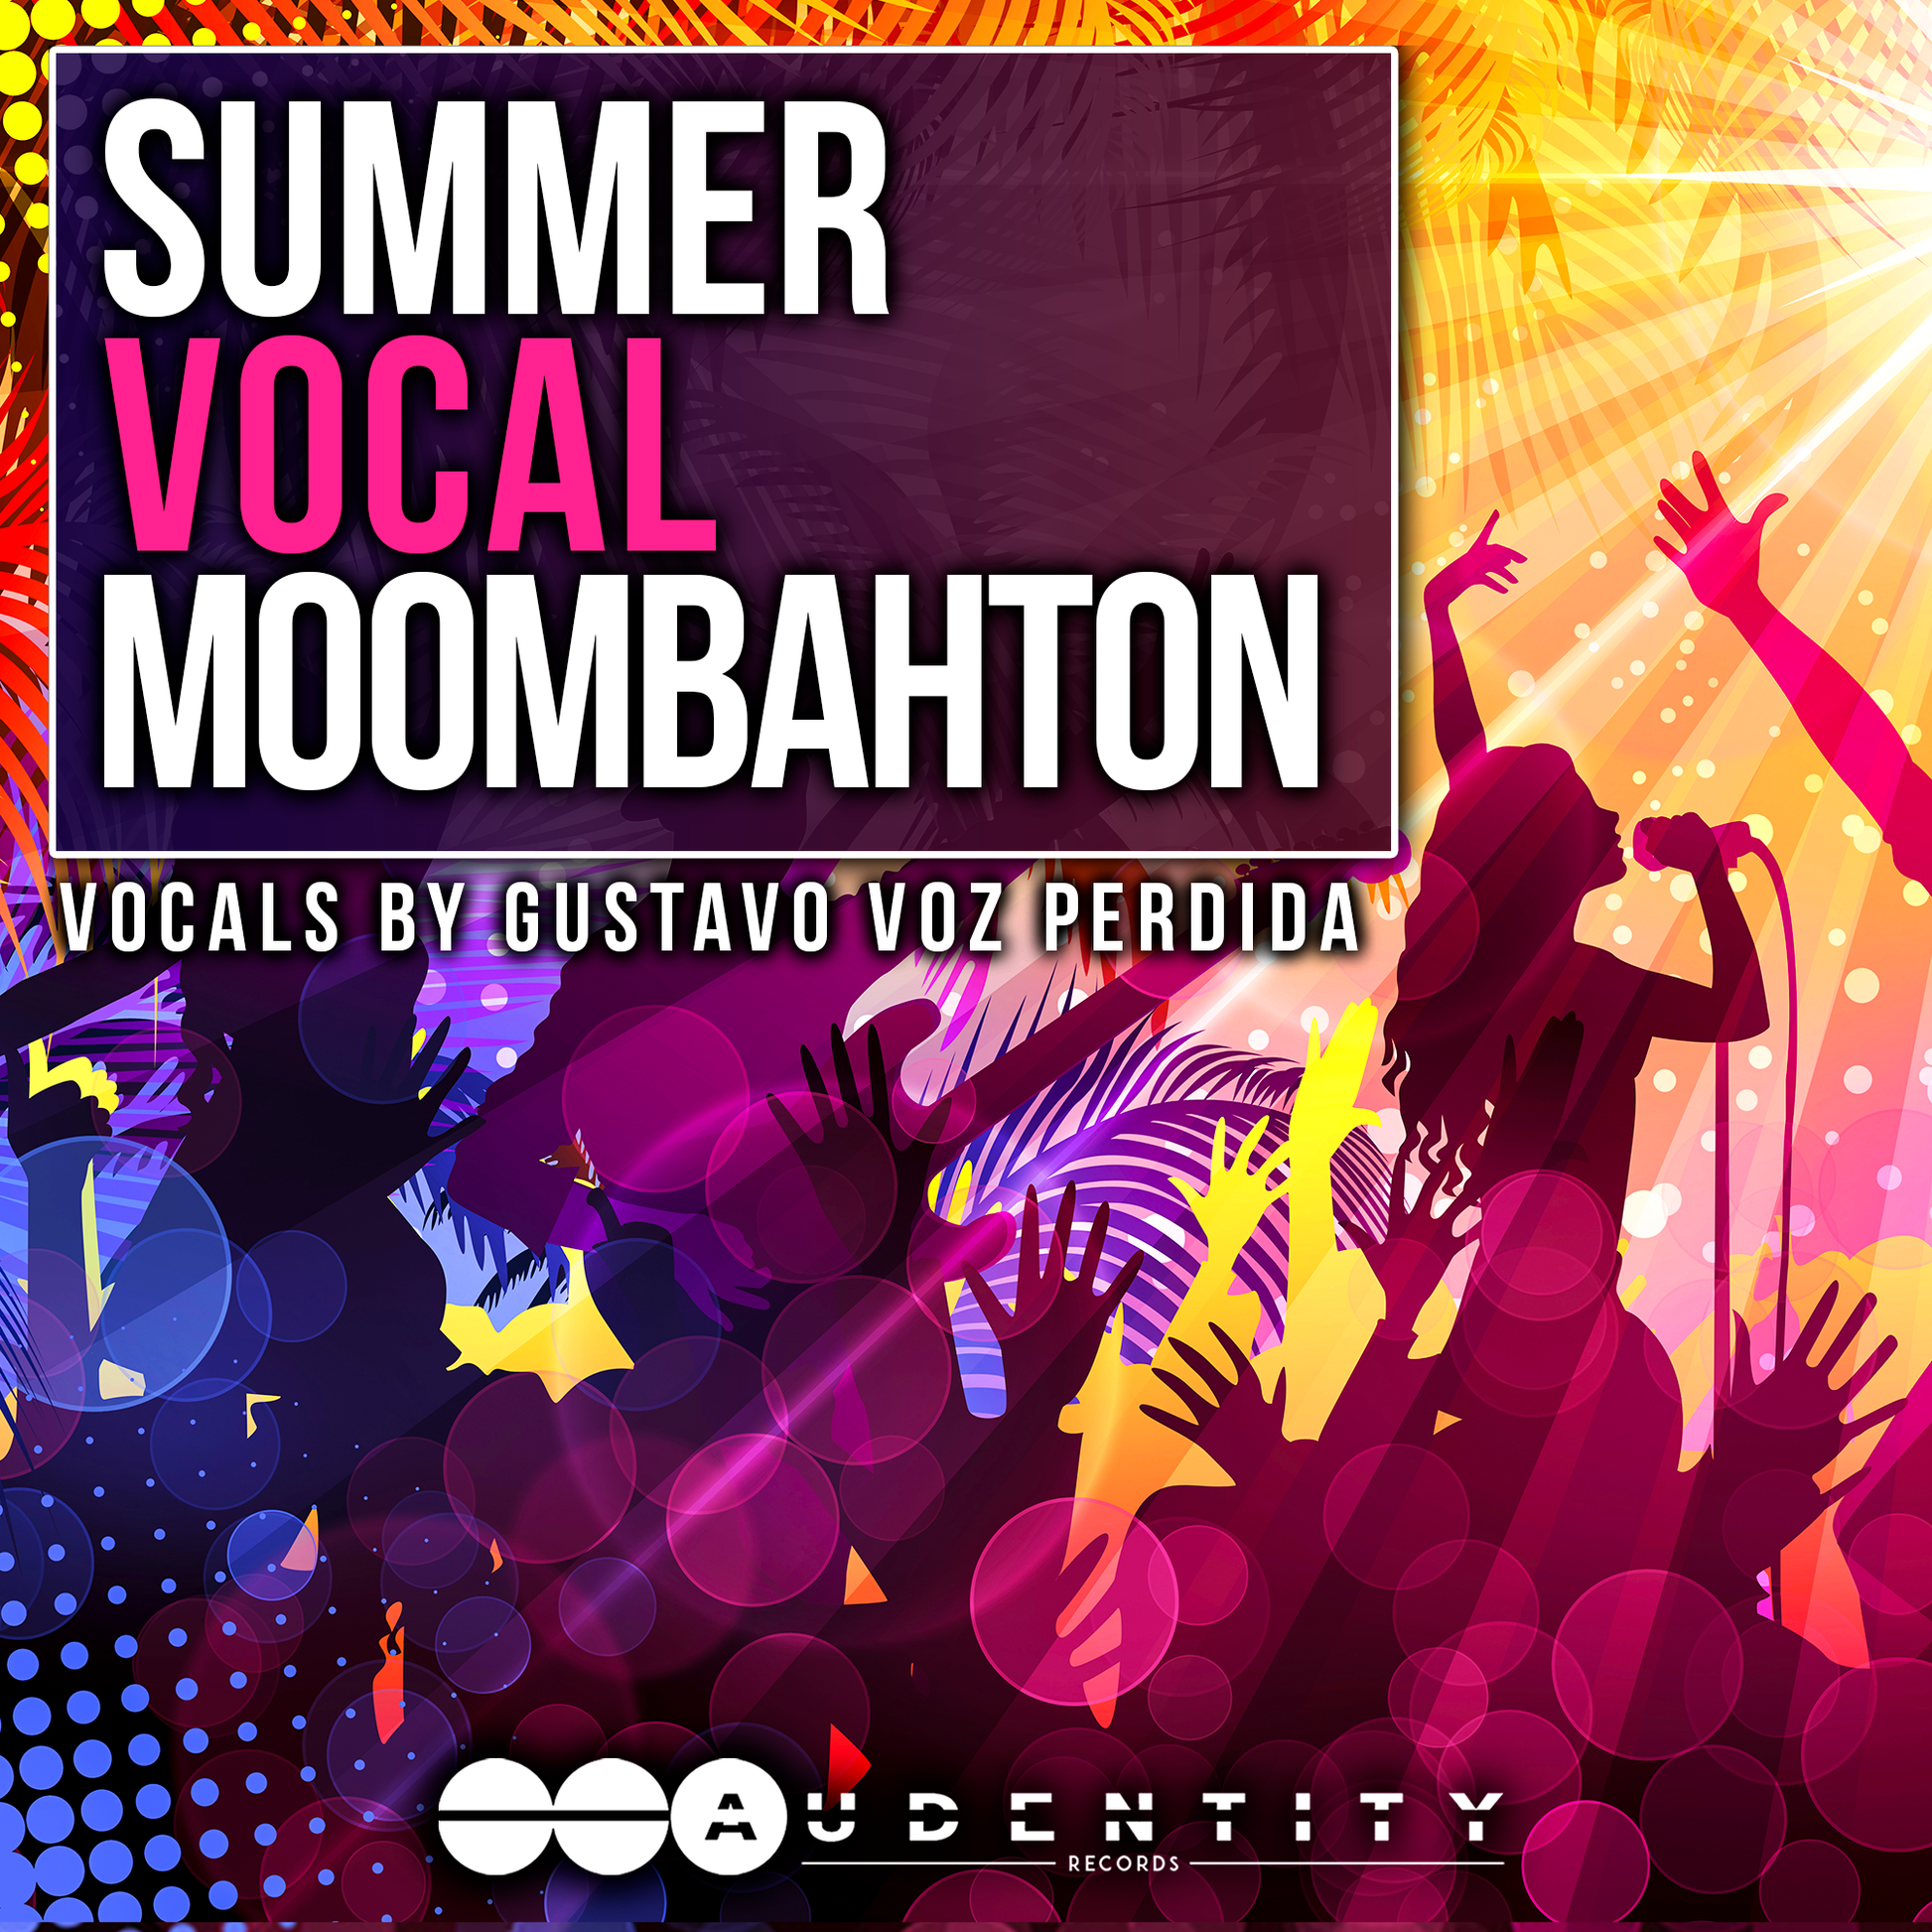 Summer Vocal Moombahton - vocal sample pack contains vocal samples